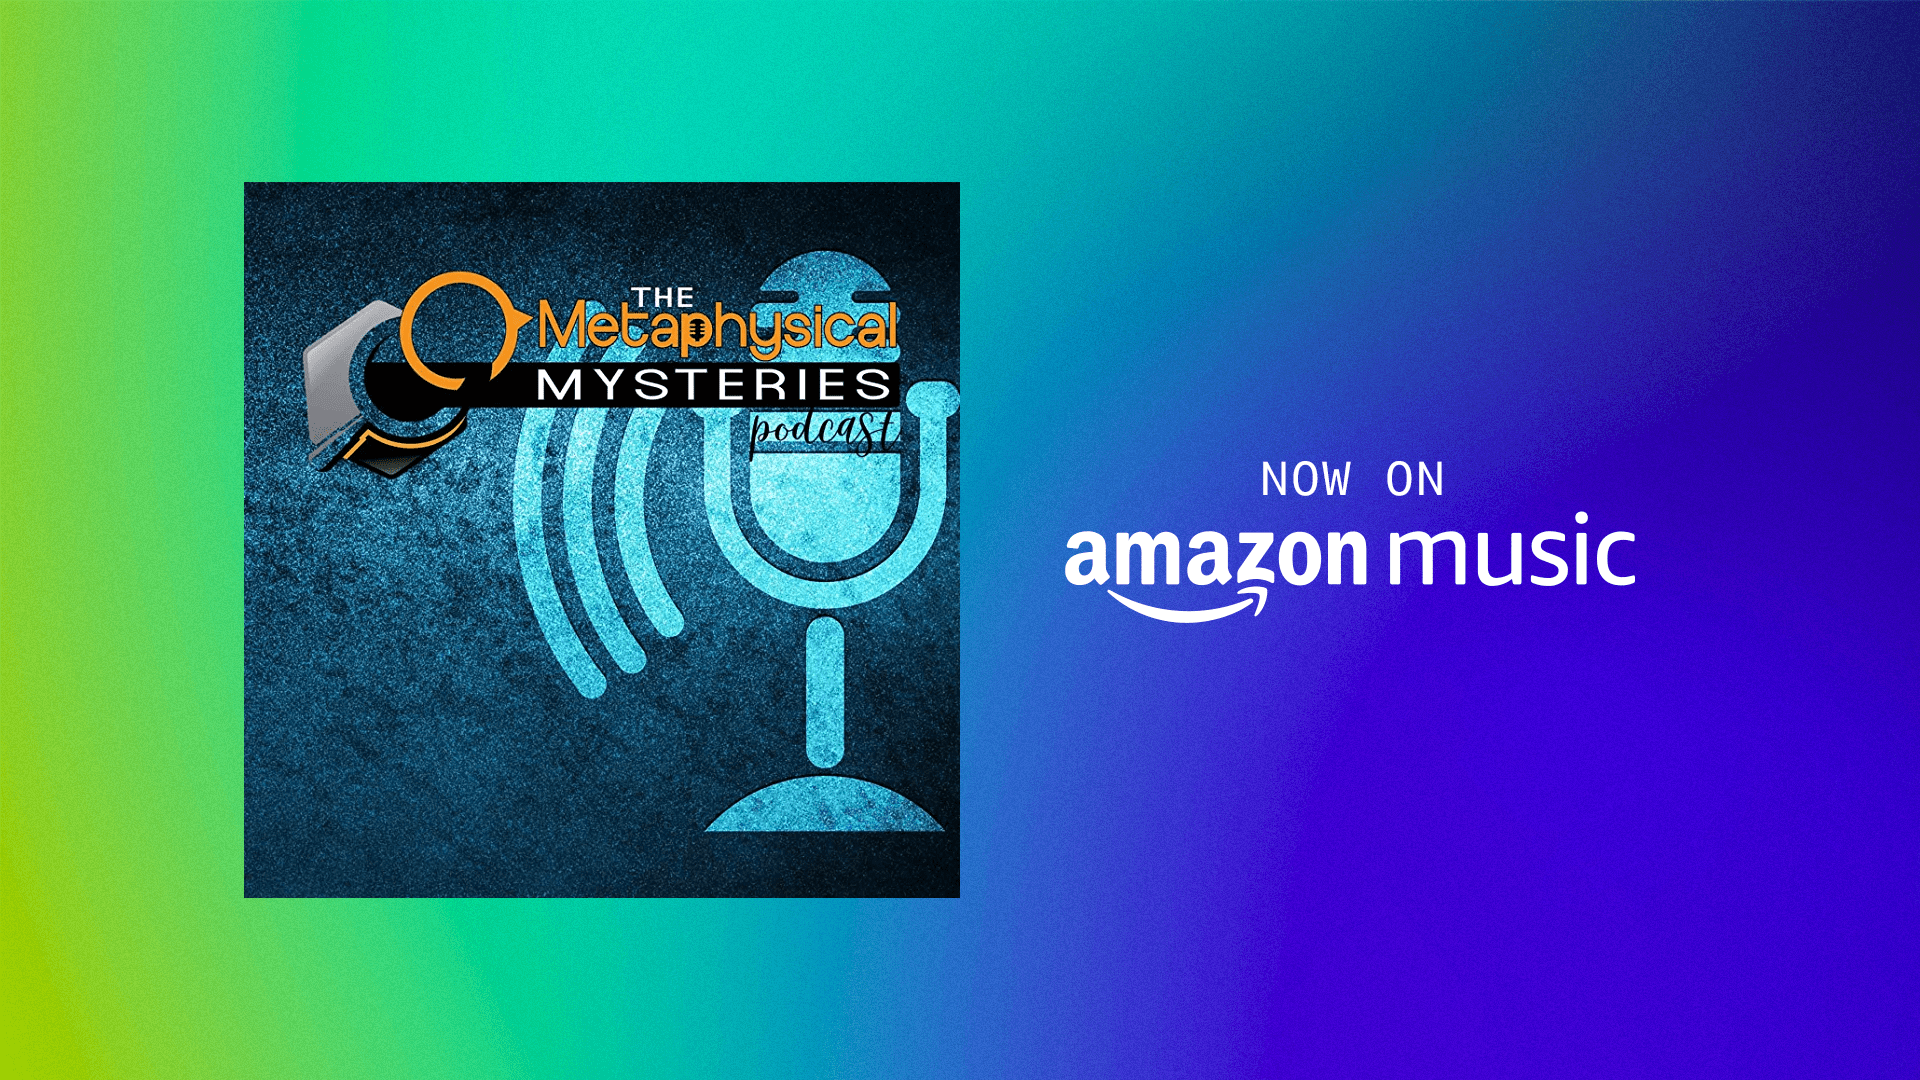 amazon the metaphysical mysteries podcast 16x19-min